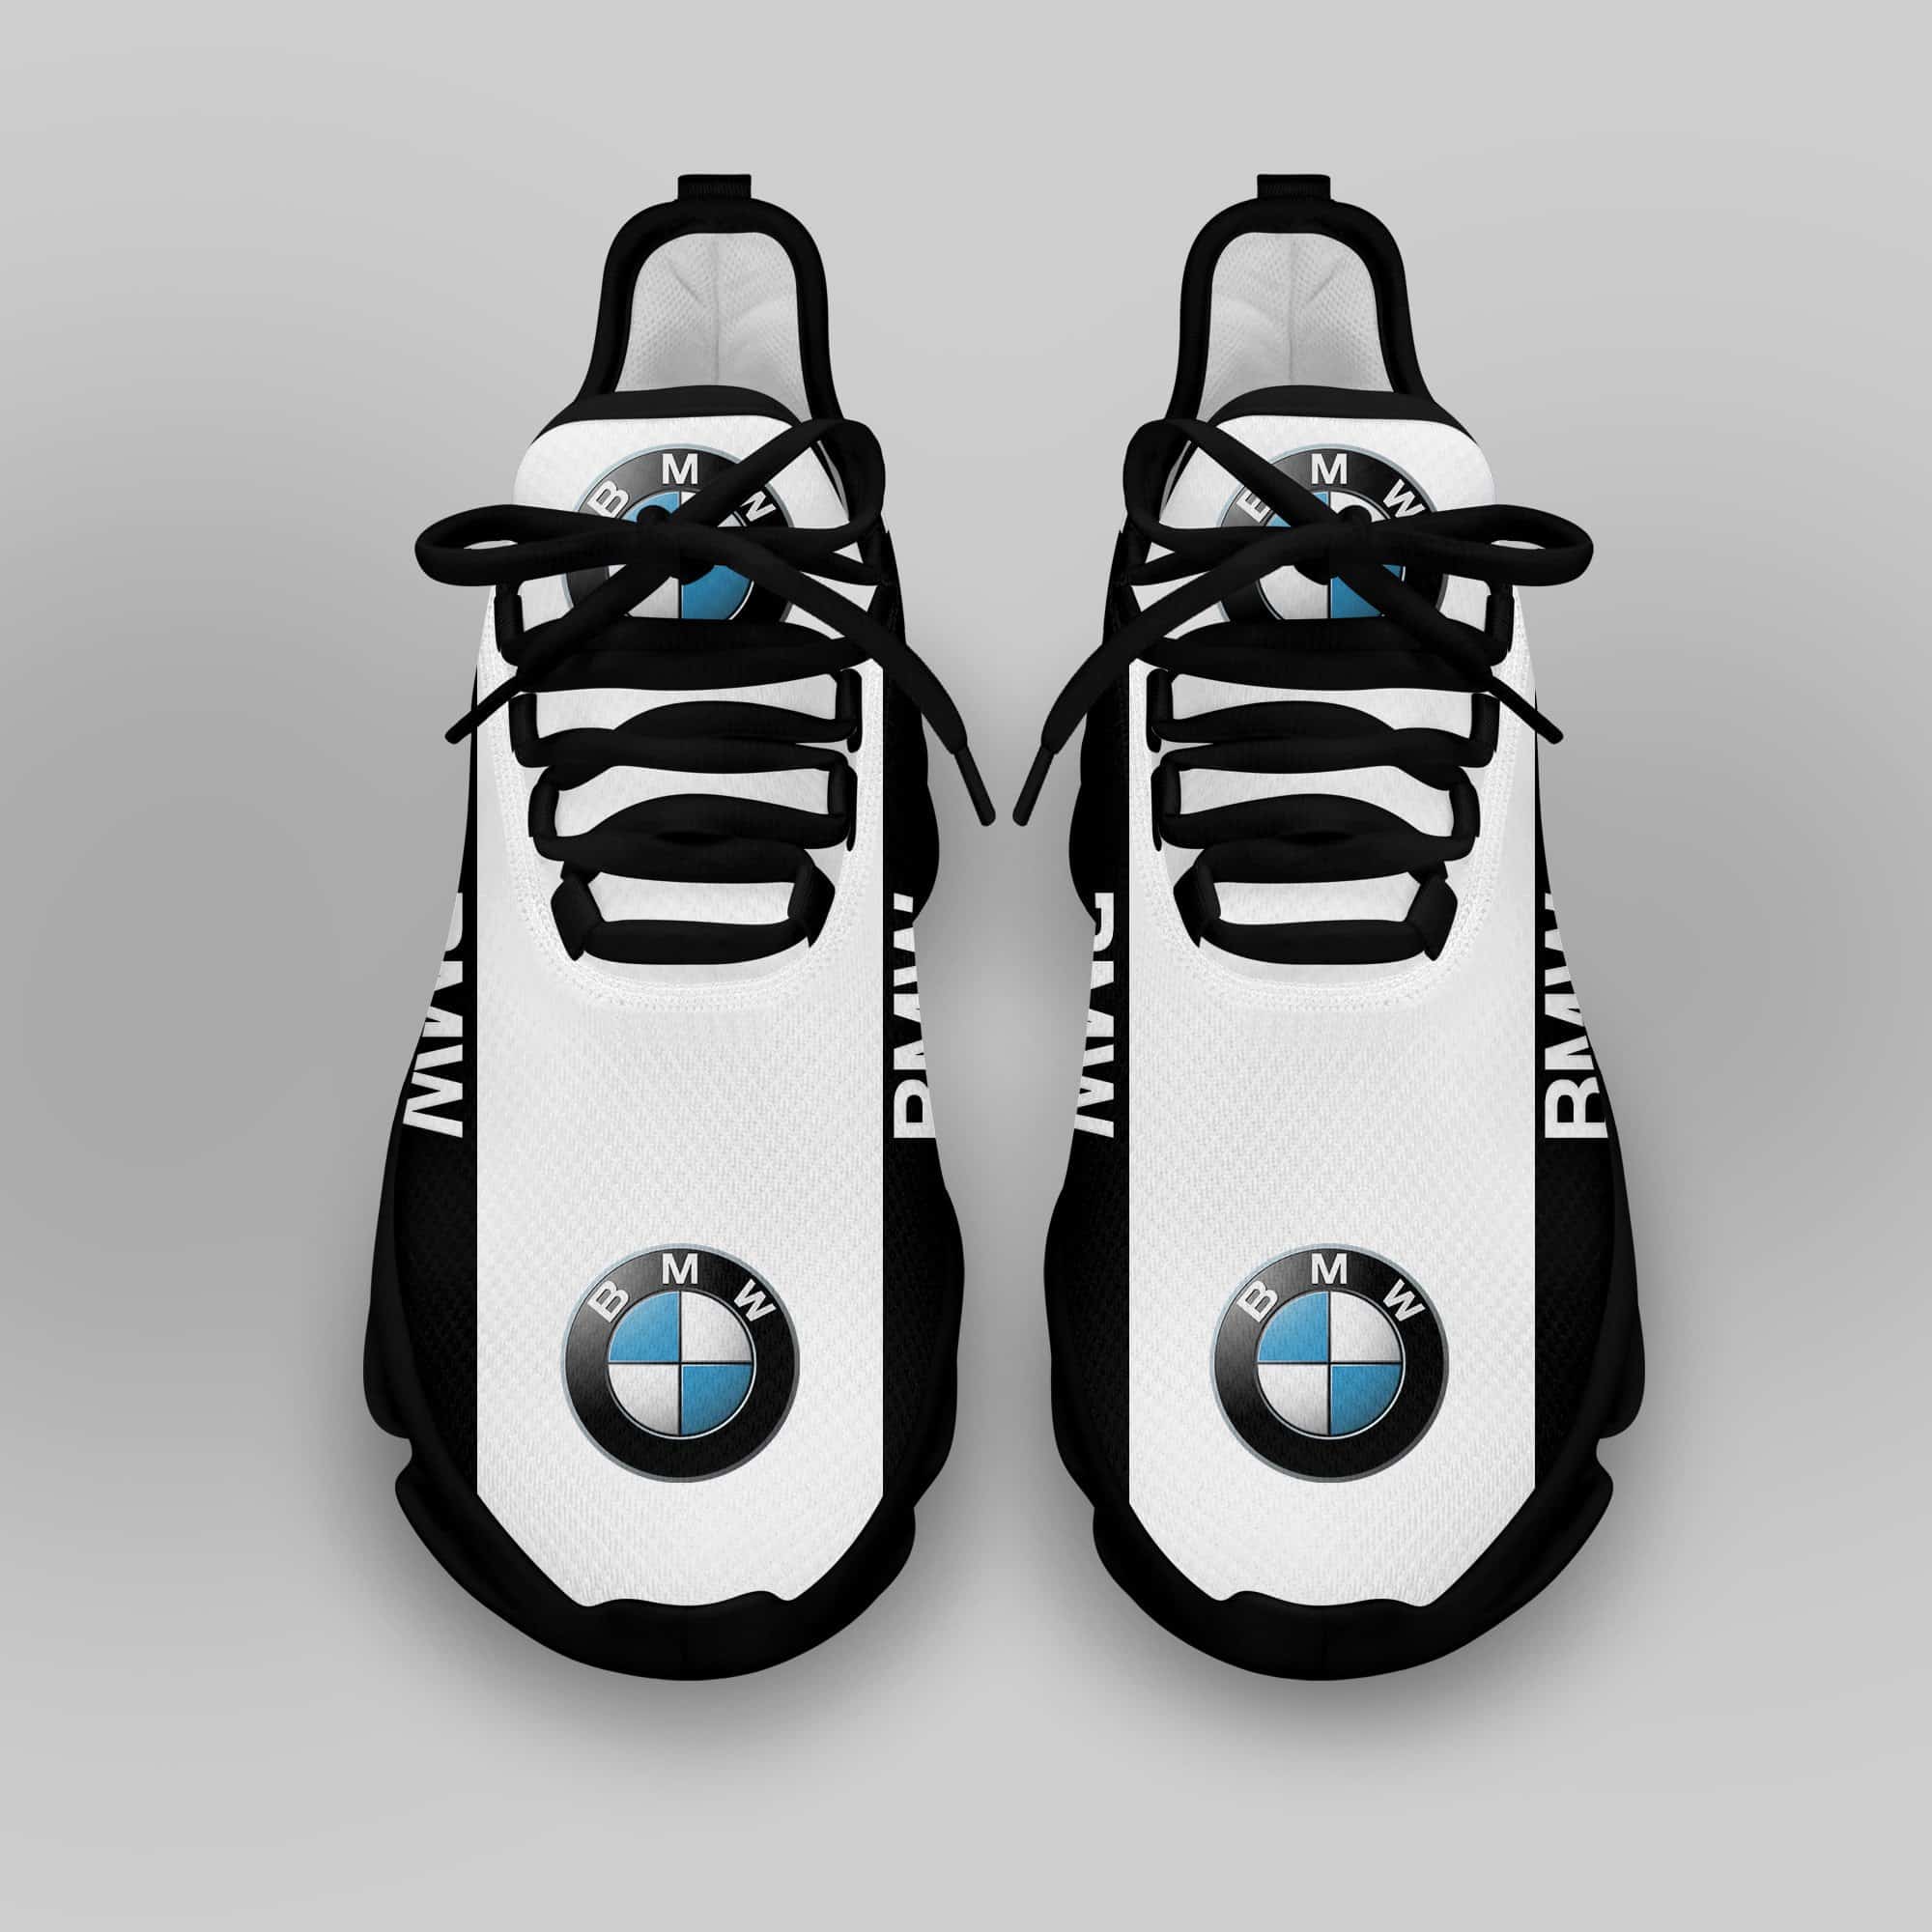 Bmw Running Shoes Max Soul Shoes Sneakers Ver 24 4